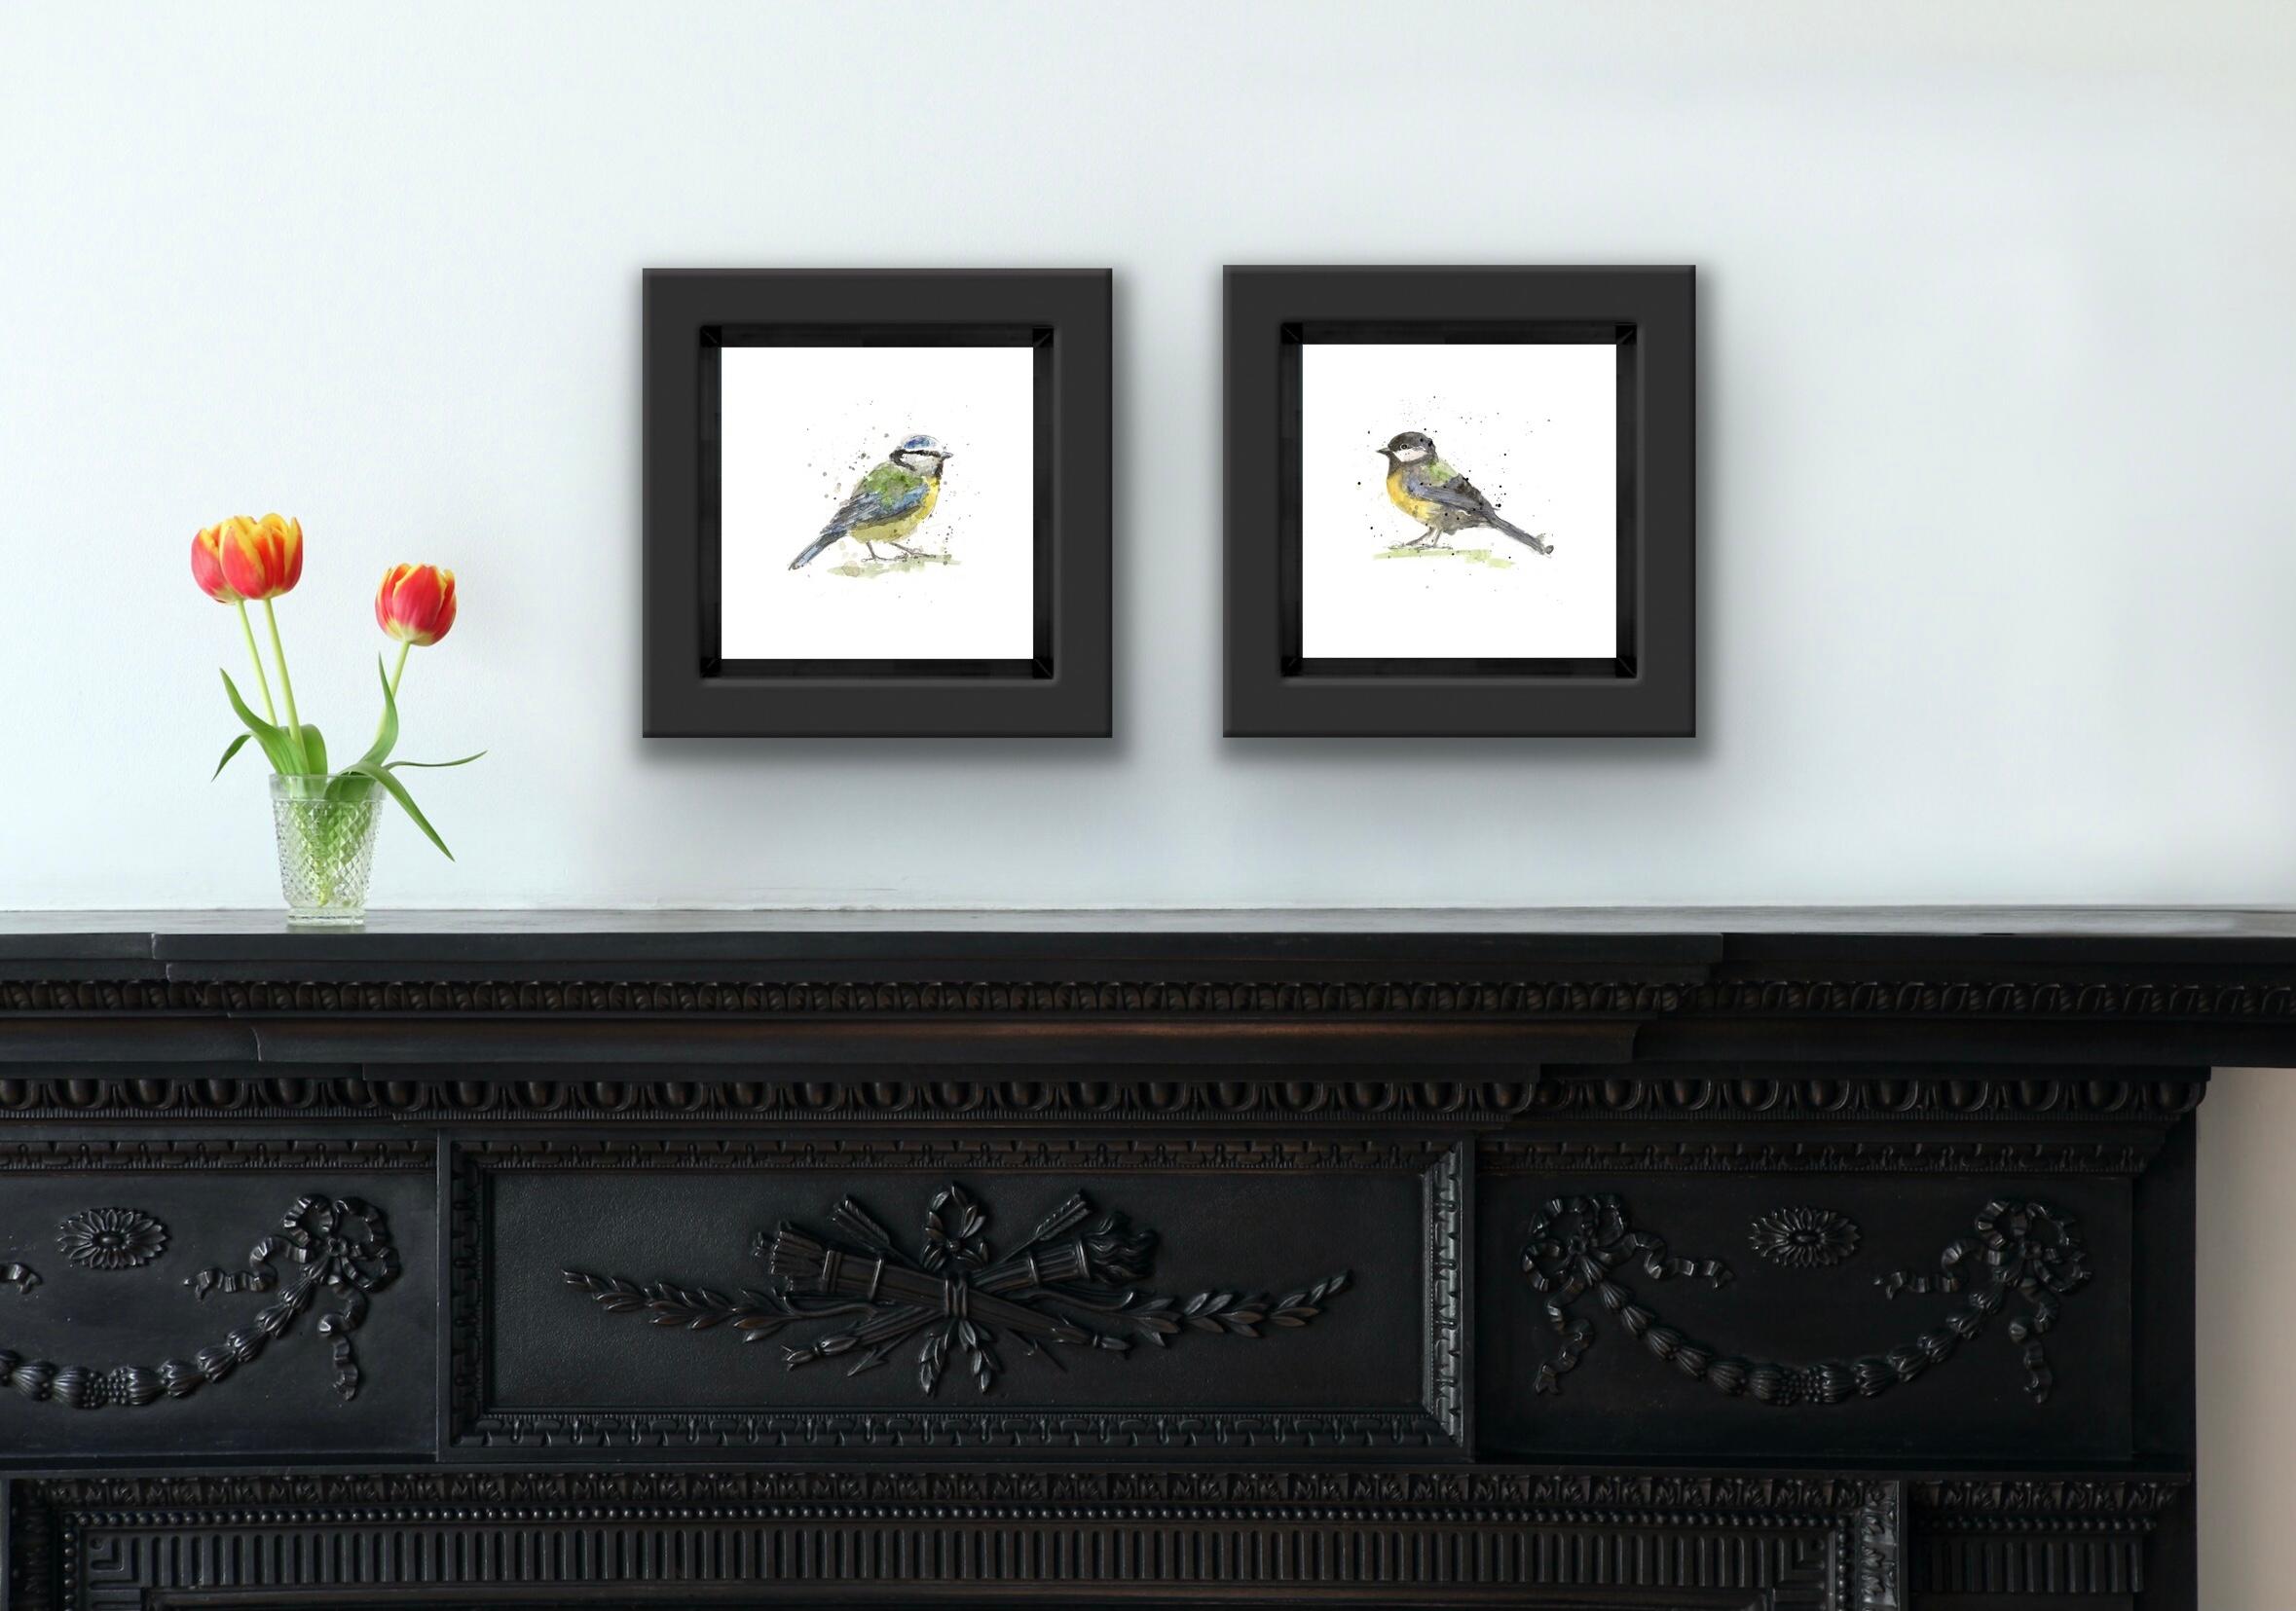 Blue Tit and Great Tit Diptych - Gray Figurative Print by Zaza Shelley